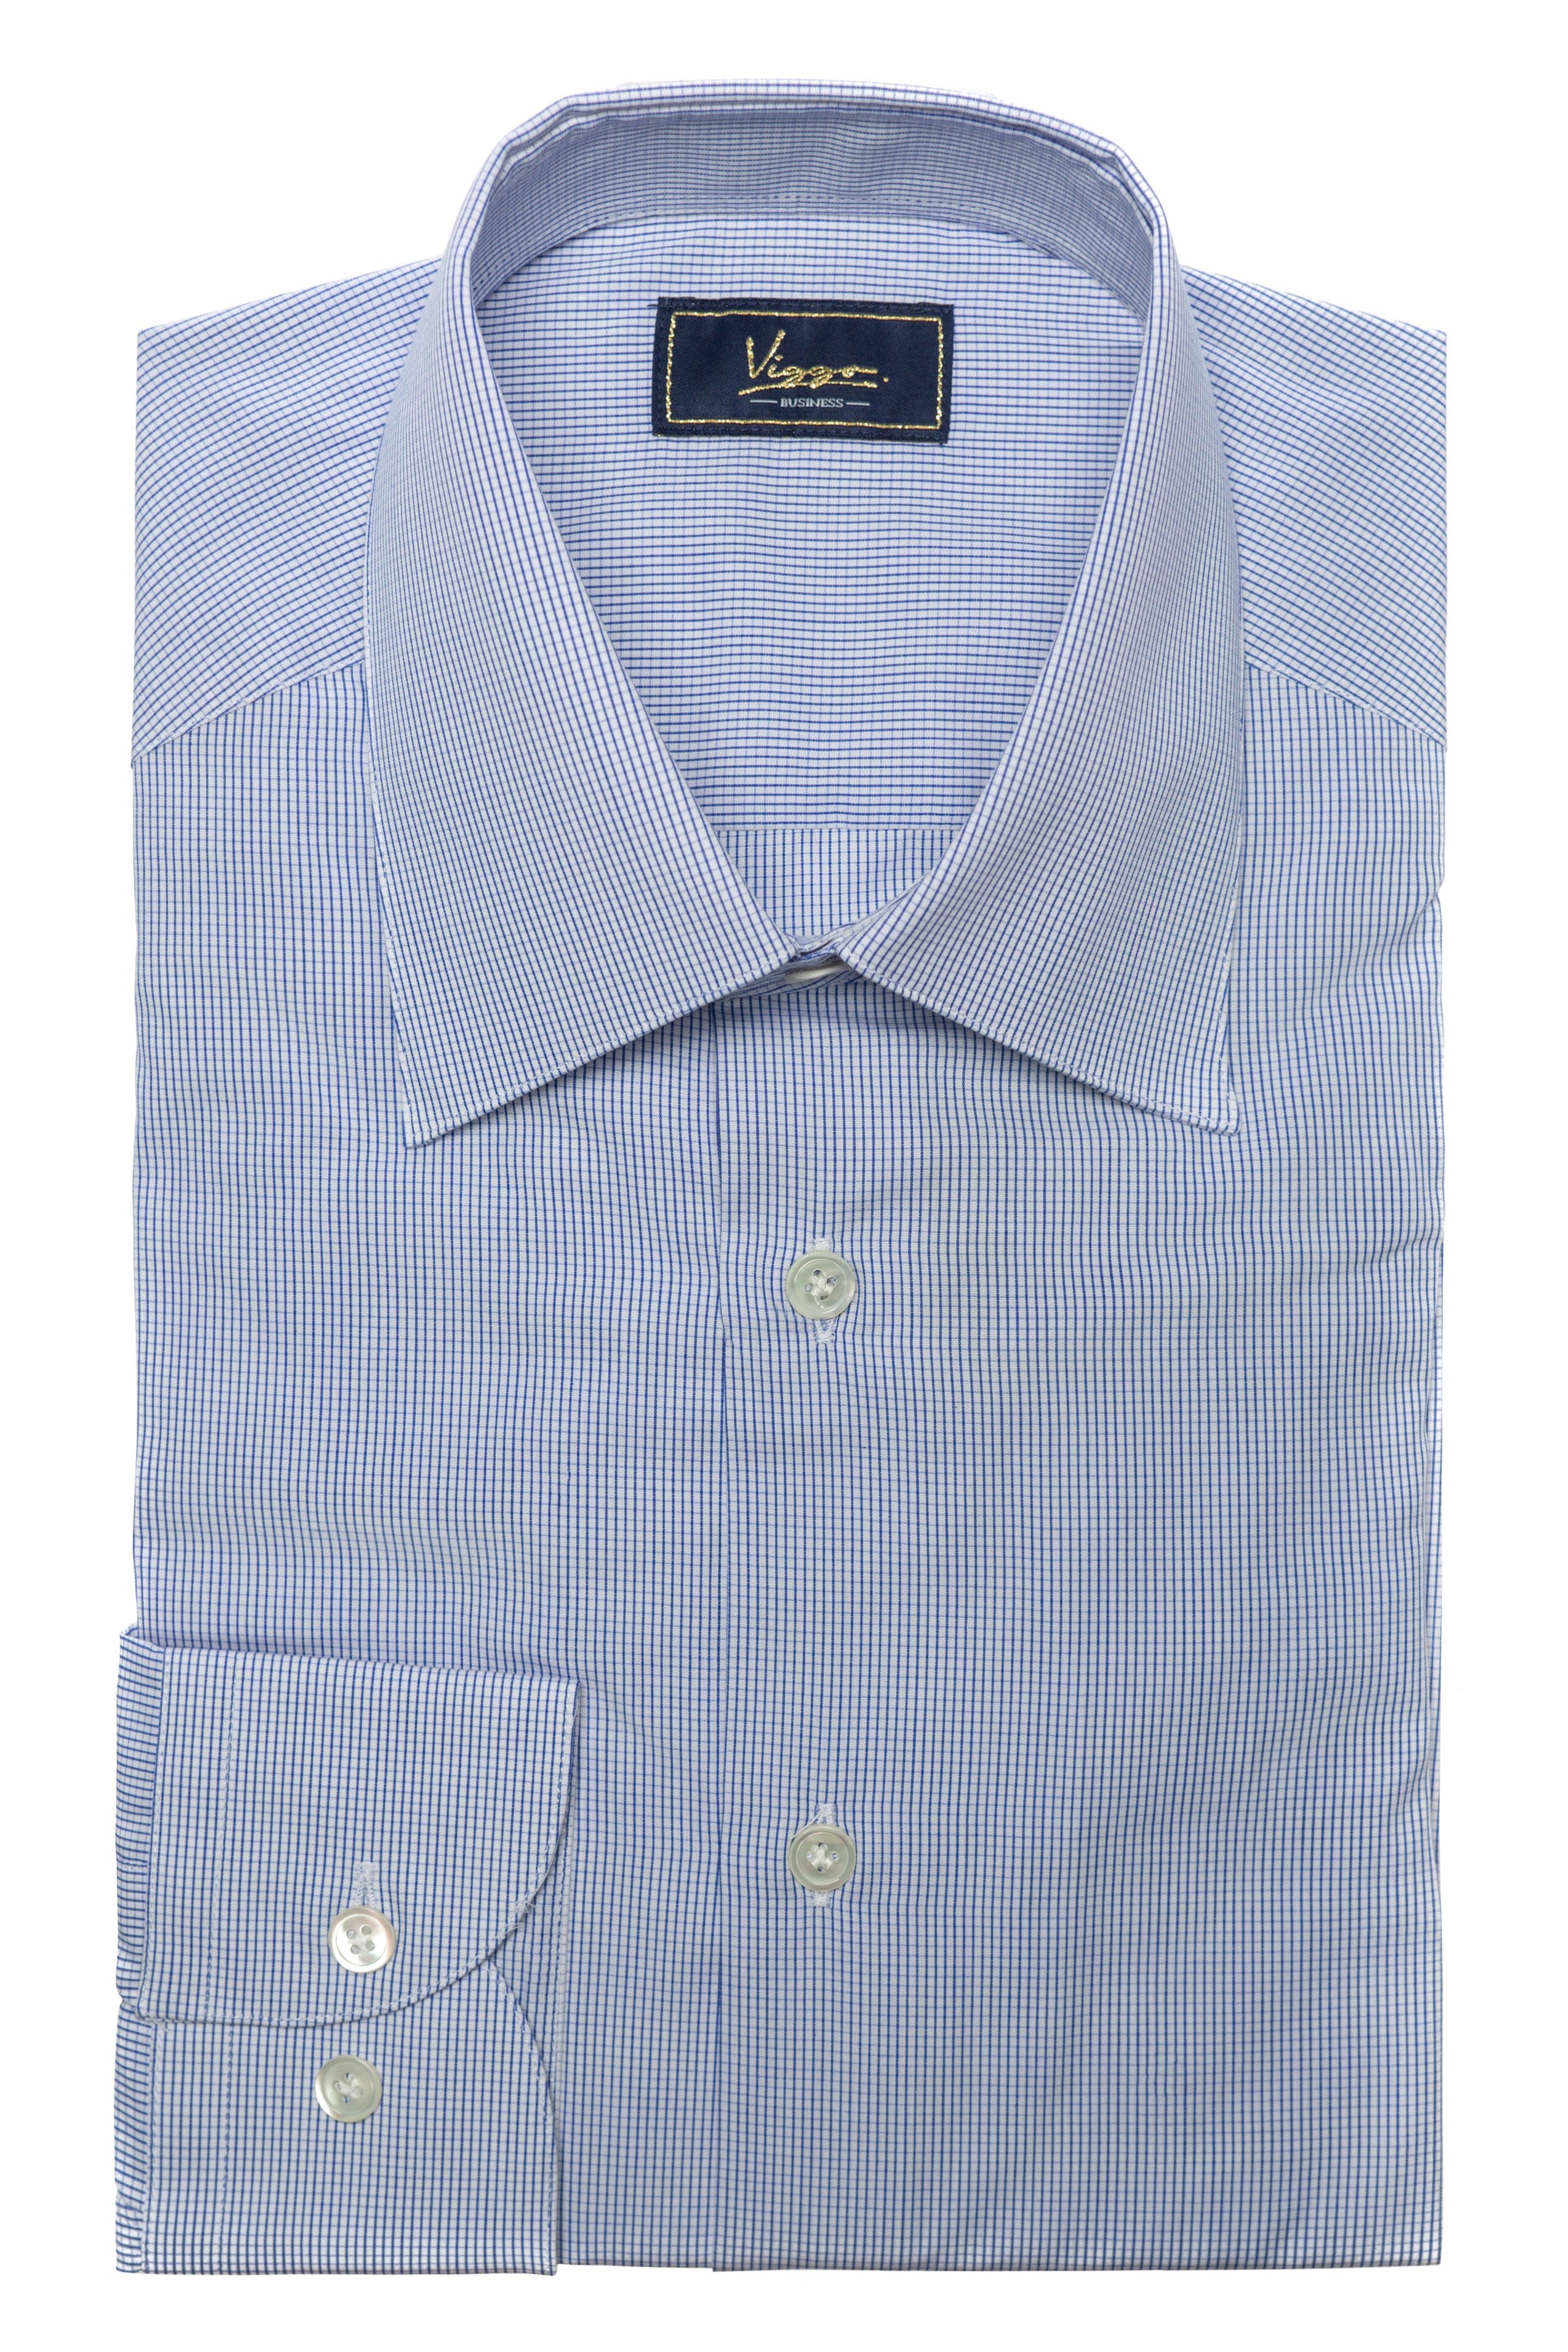 White shirt with blue squares